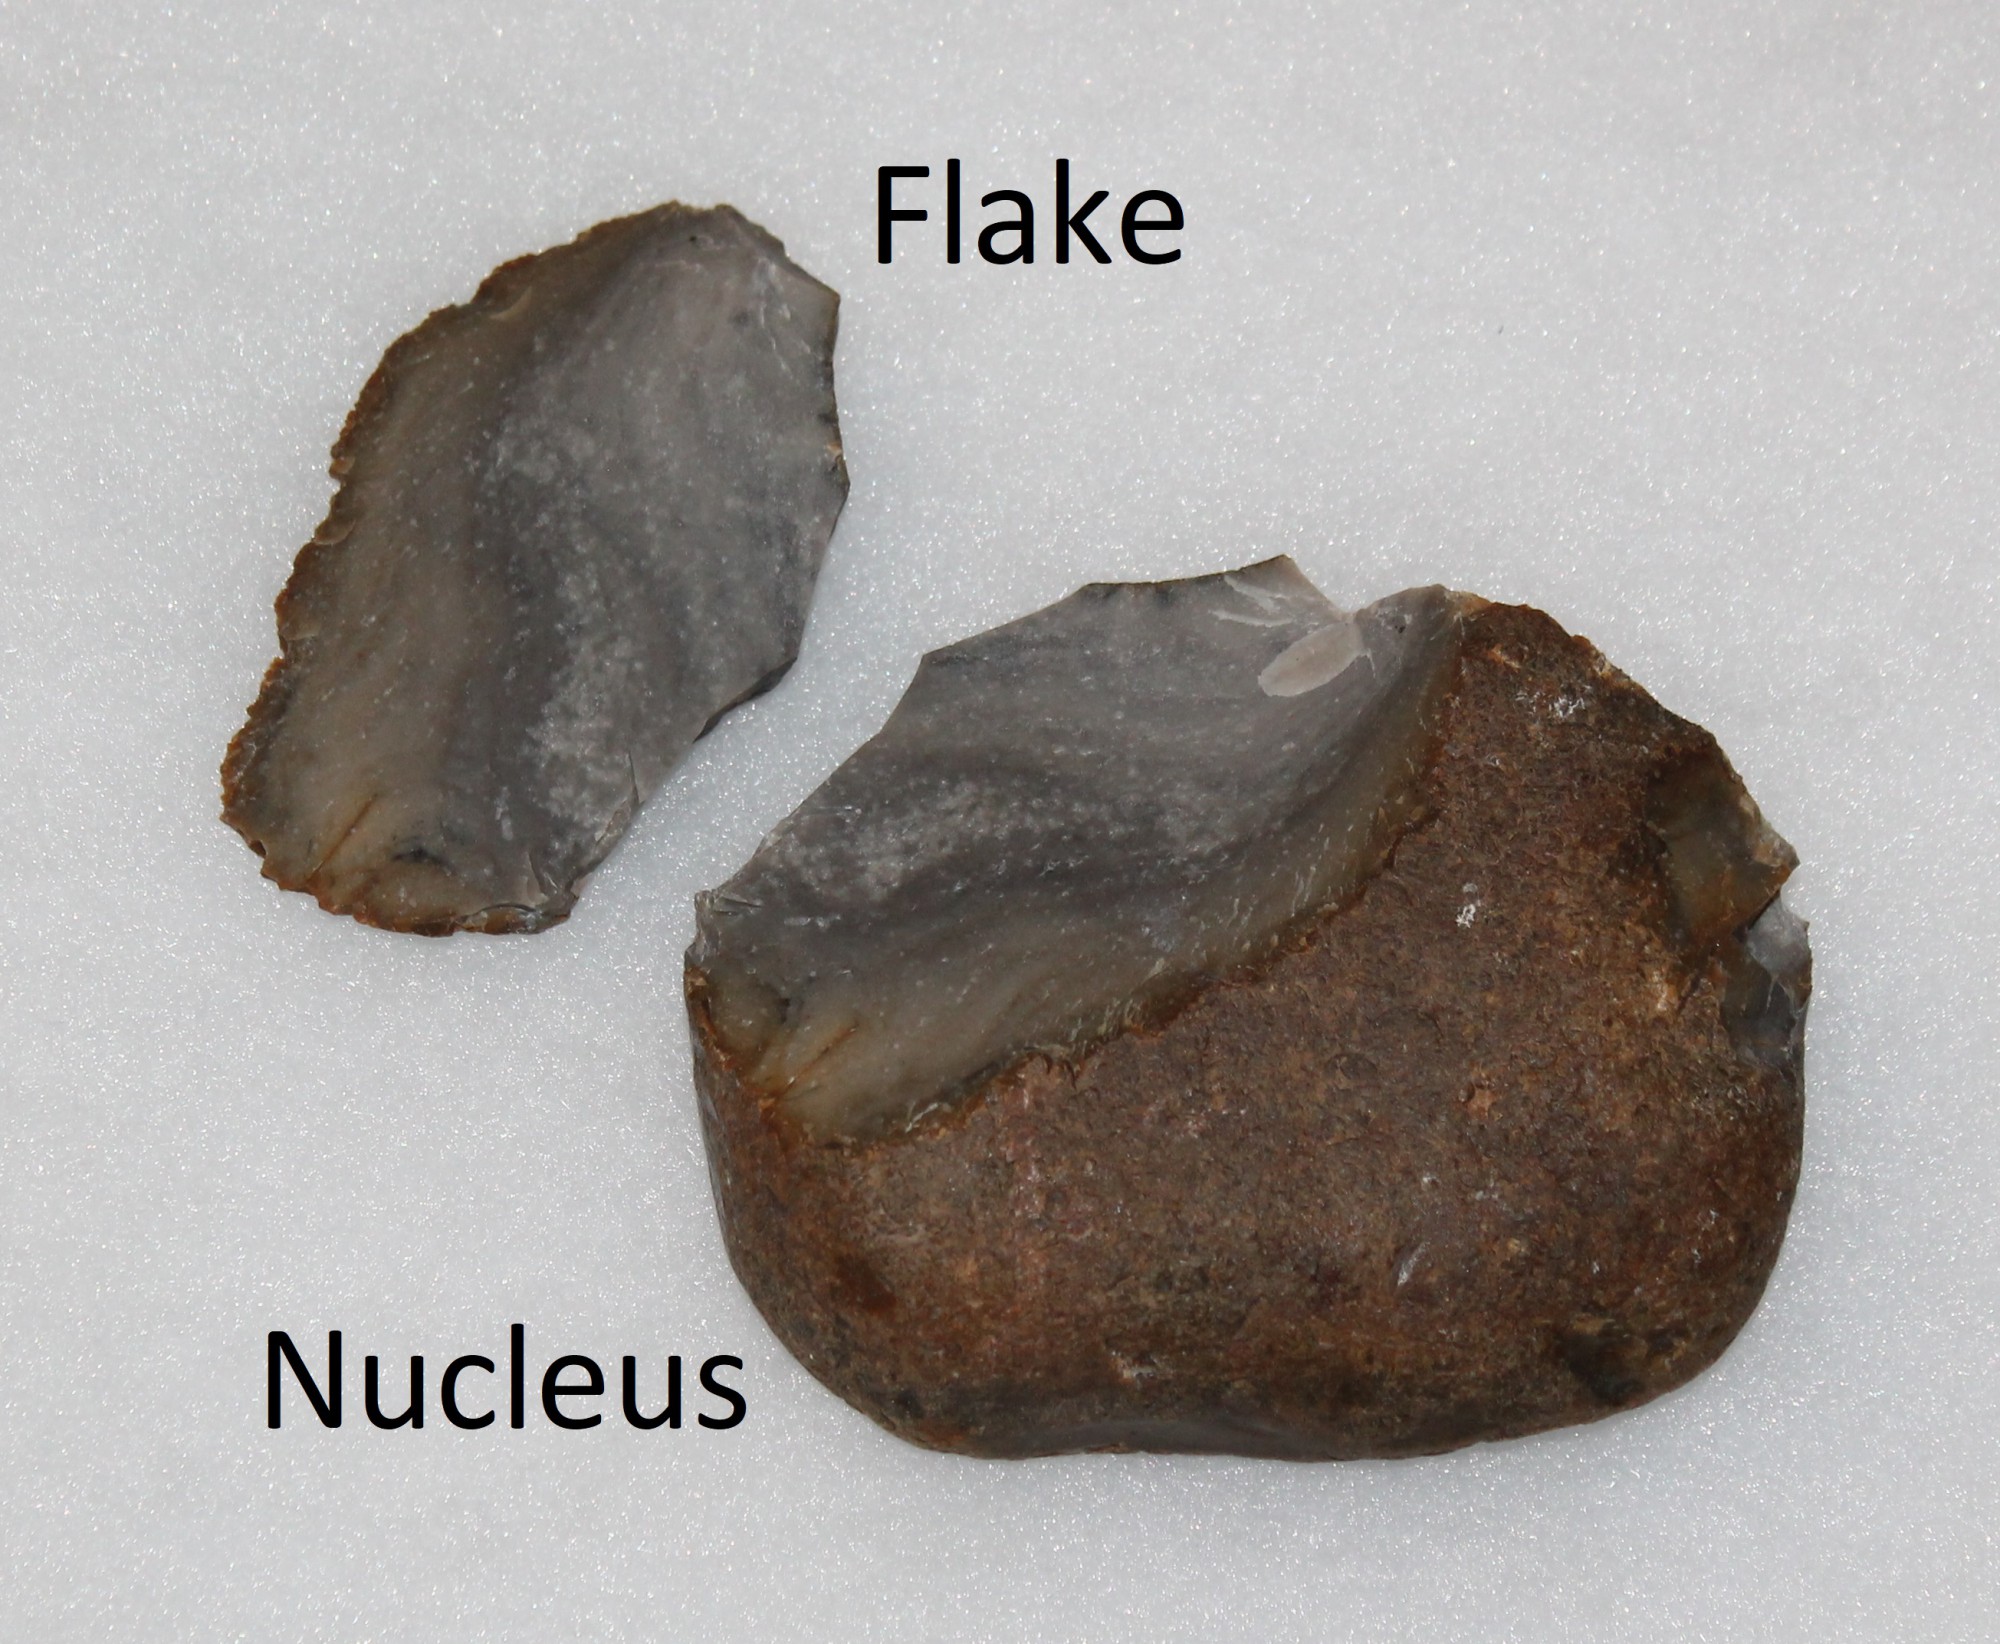 Nucleus and flake